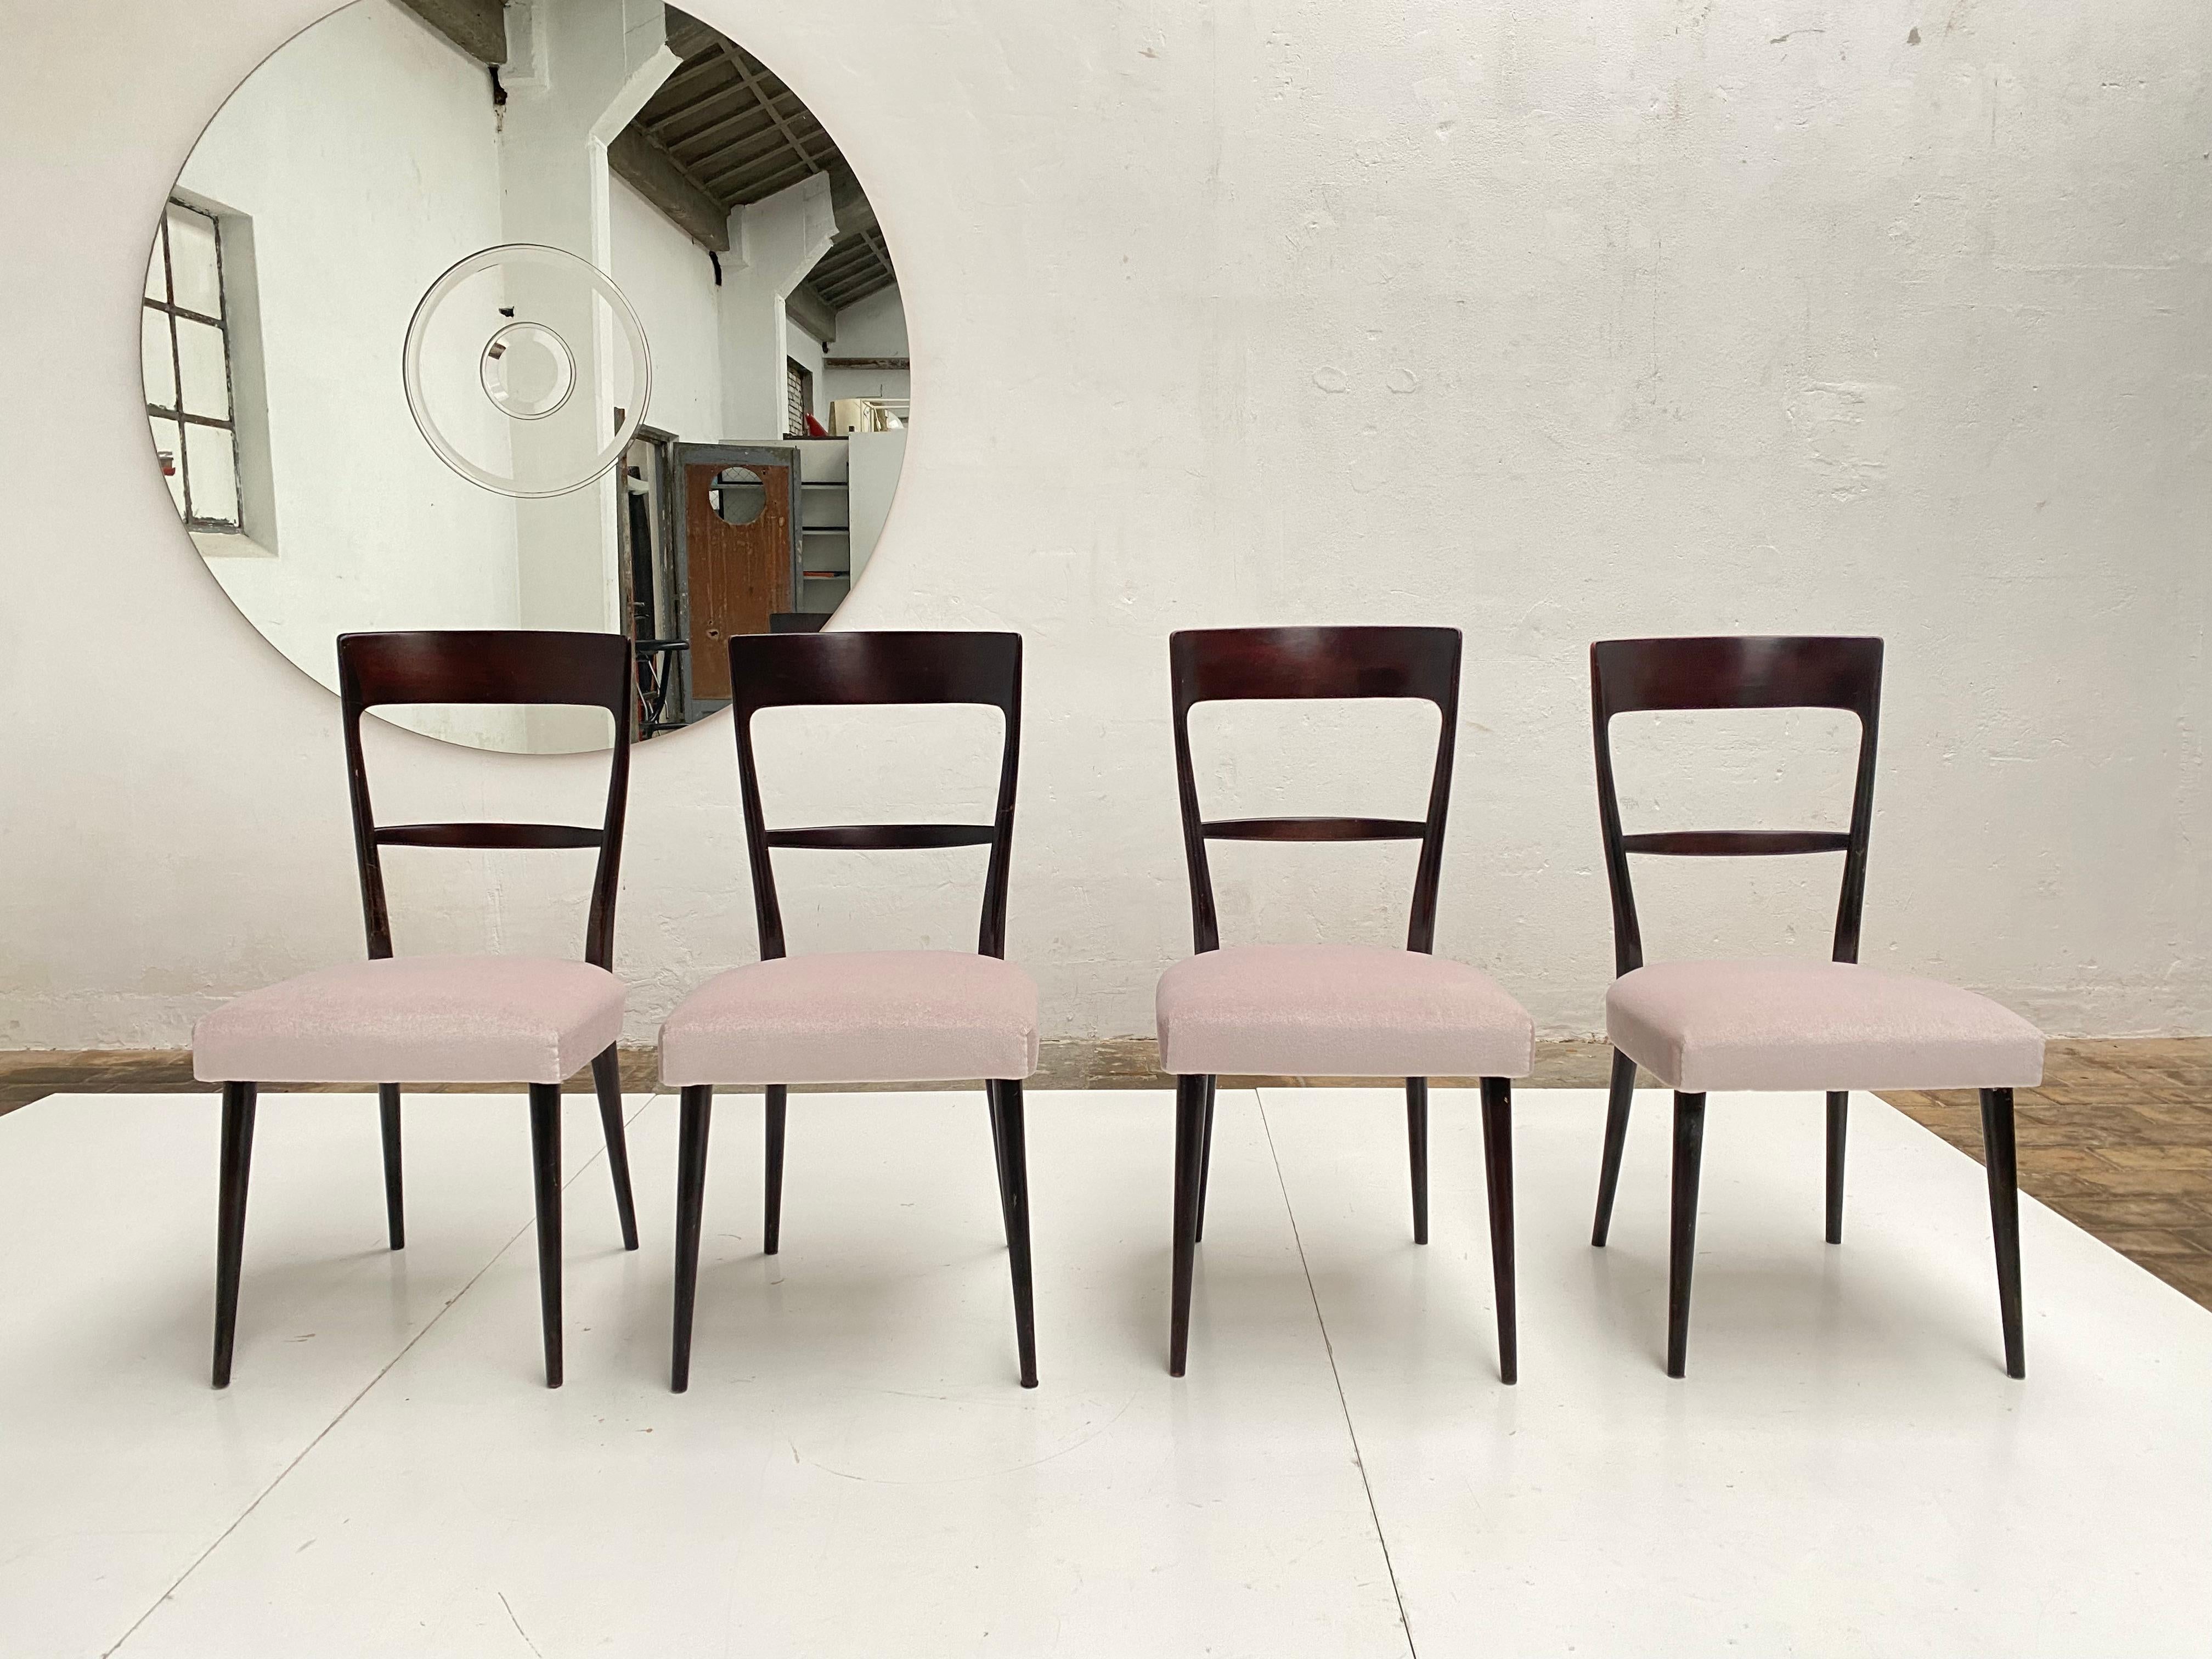 Set of 4 Italian 1950s dining chairs in dark mahogany stained ash or beechwood.

This set has been restored with new 